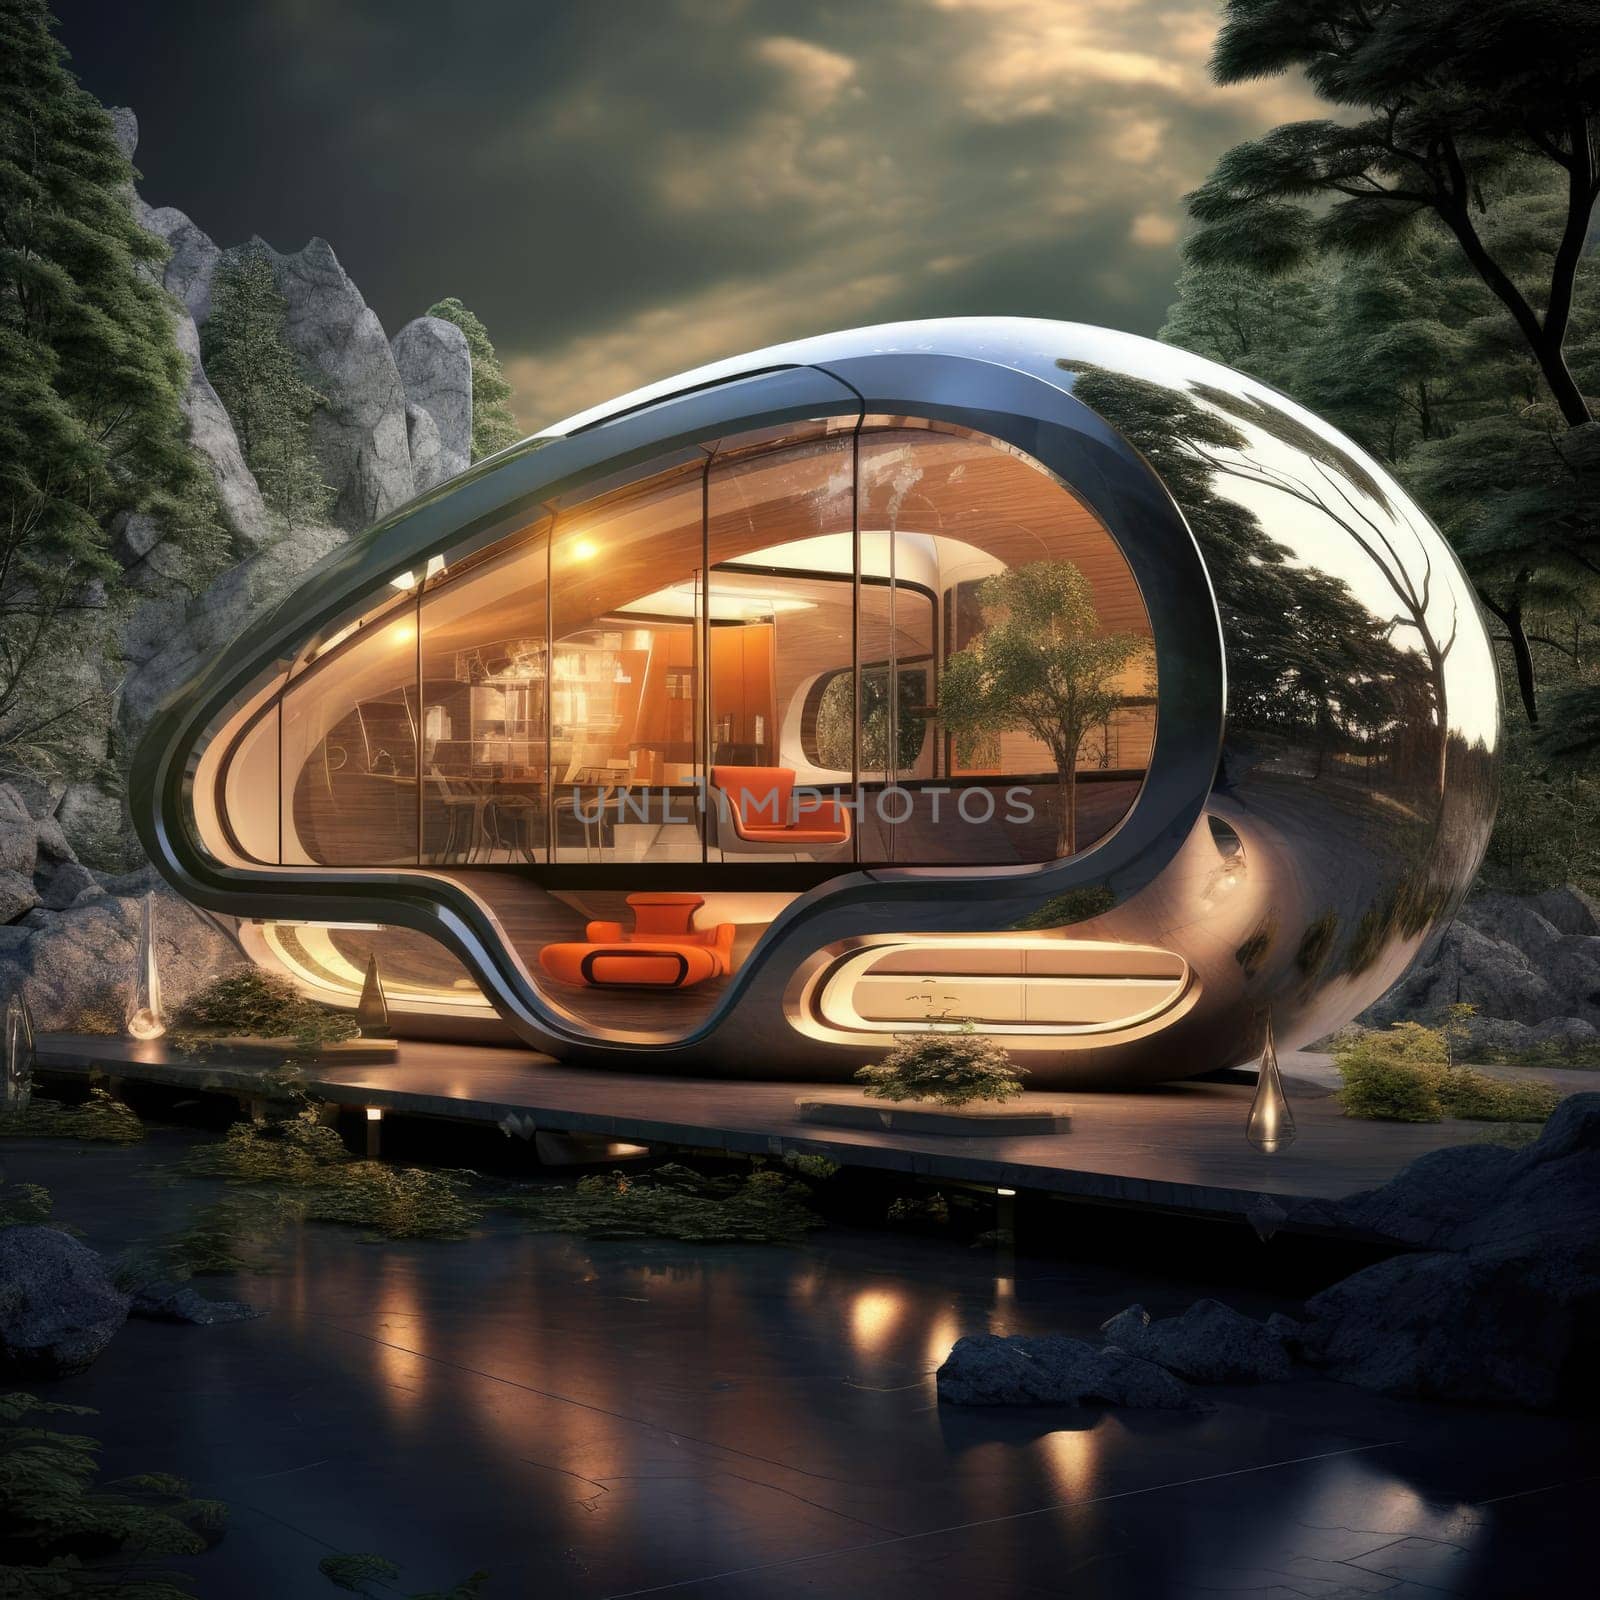 The cottage of the future, soft lines and high technology